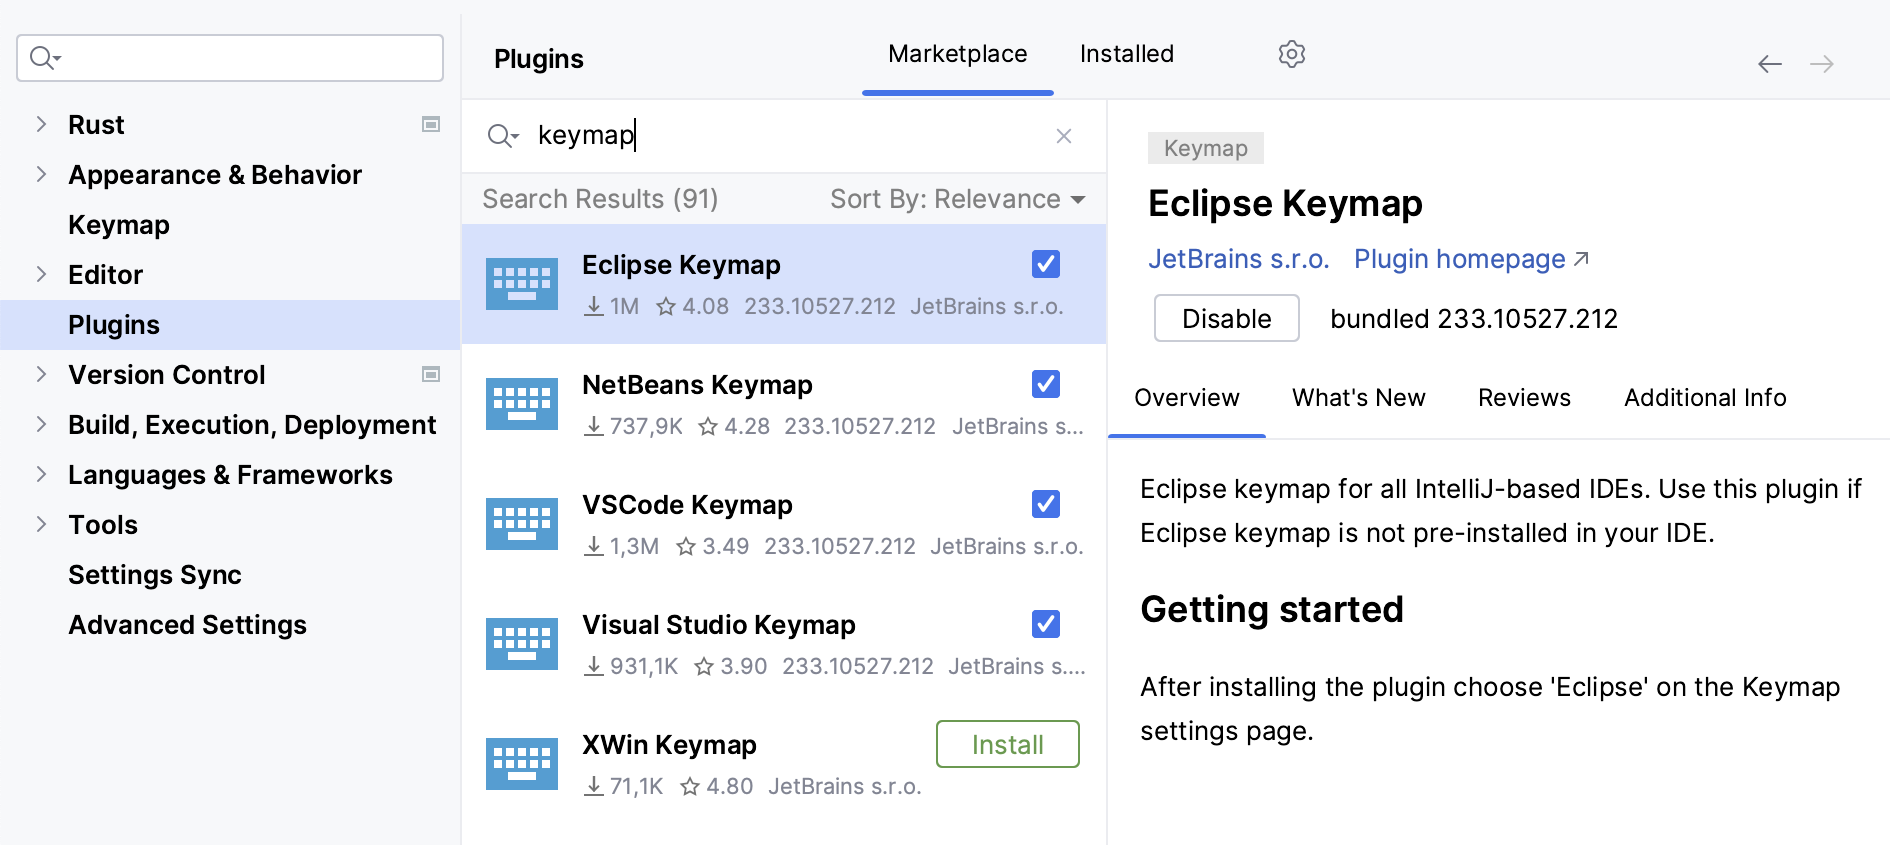 Searching for keymap plugins on Markeplace